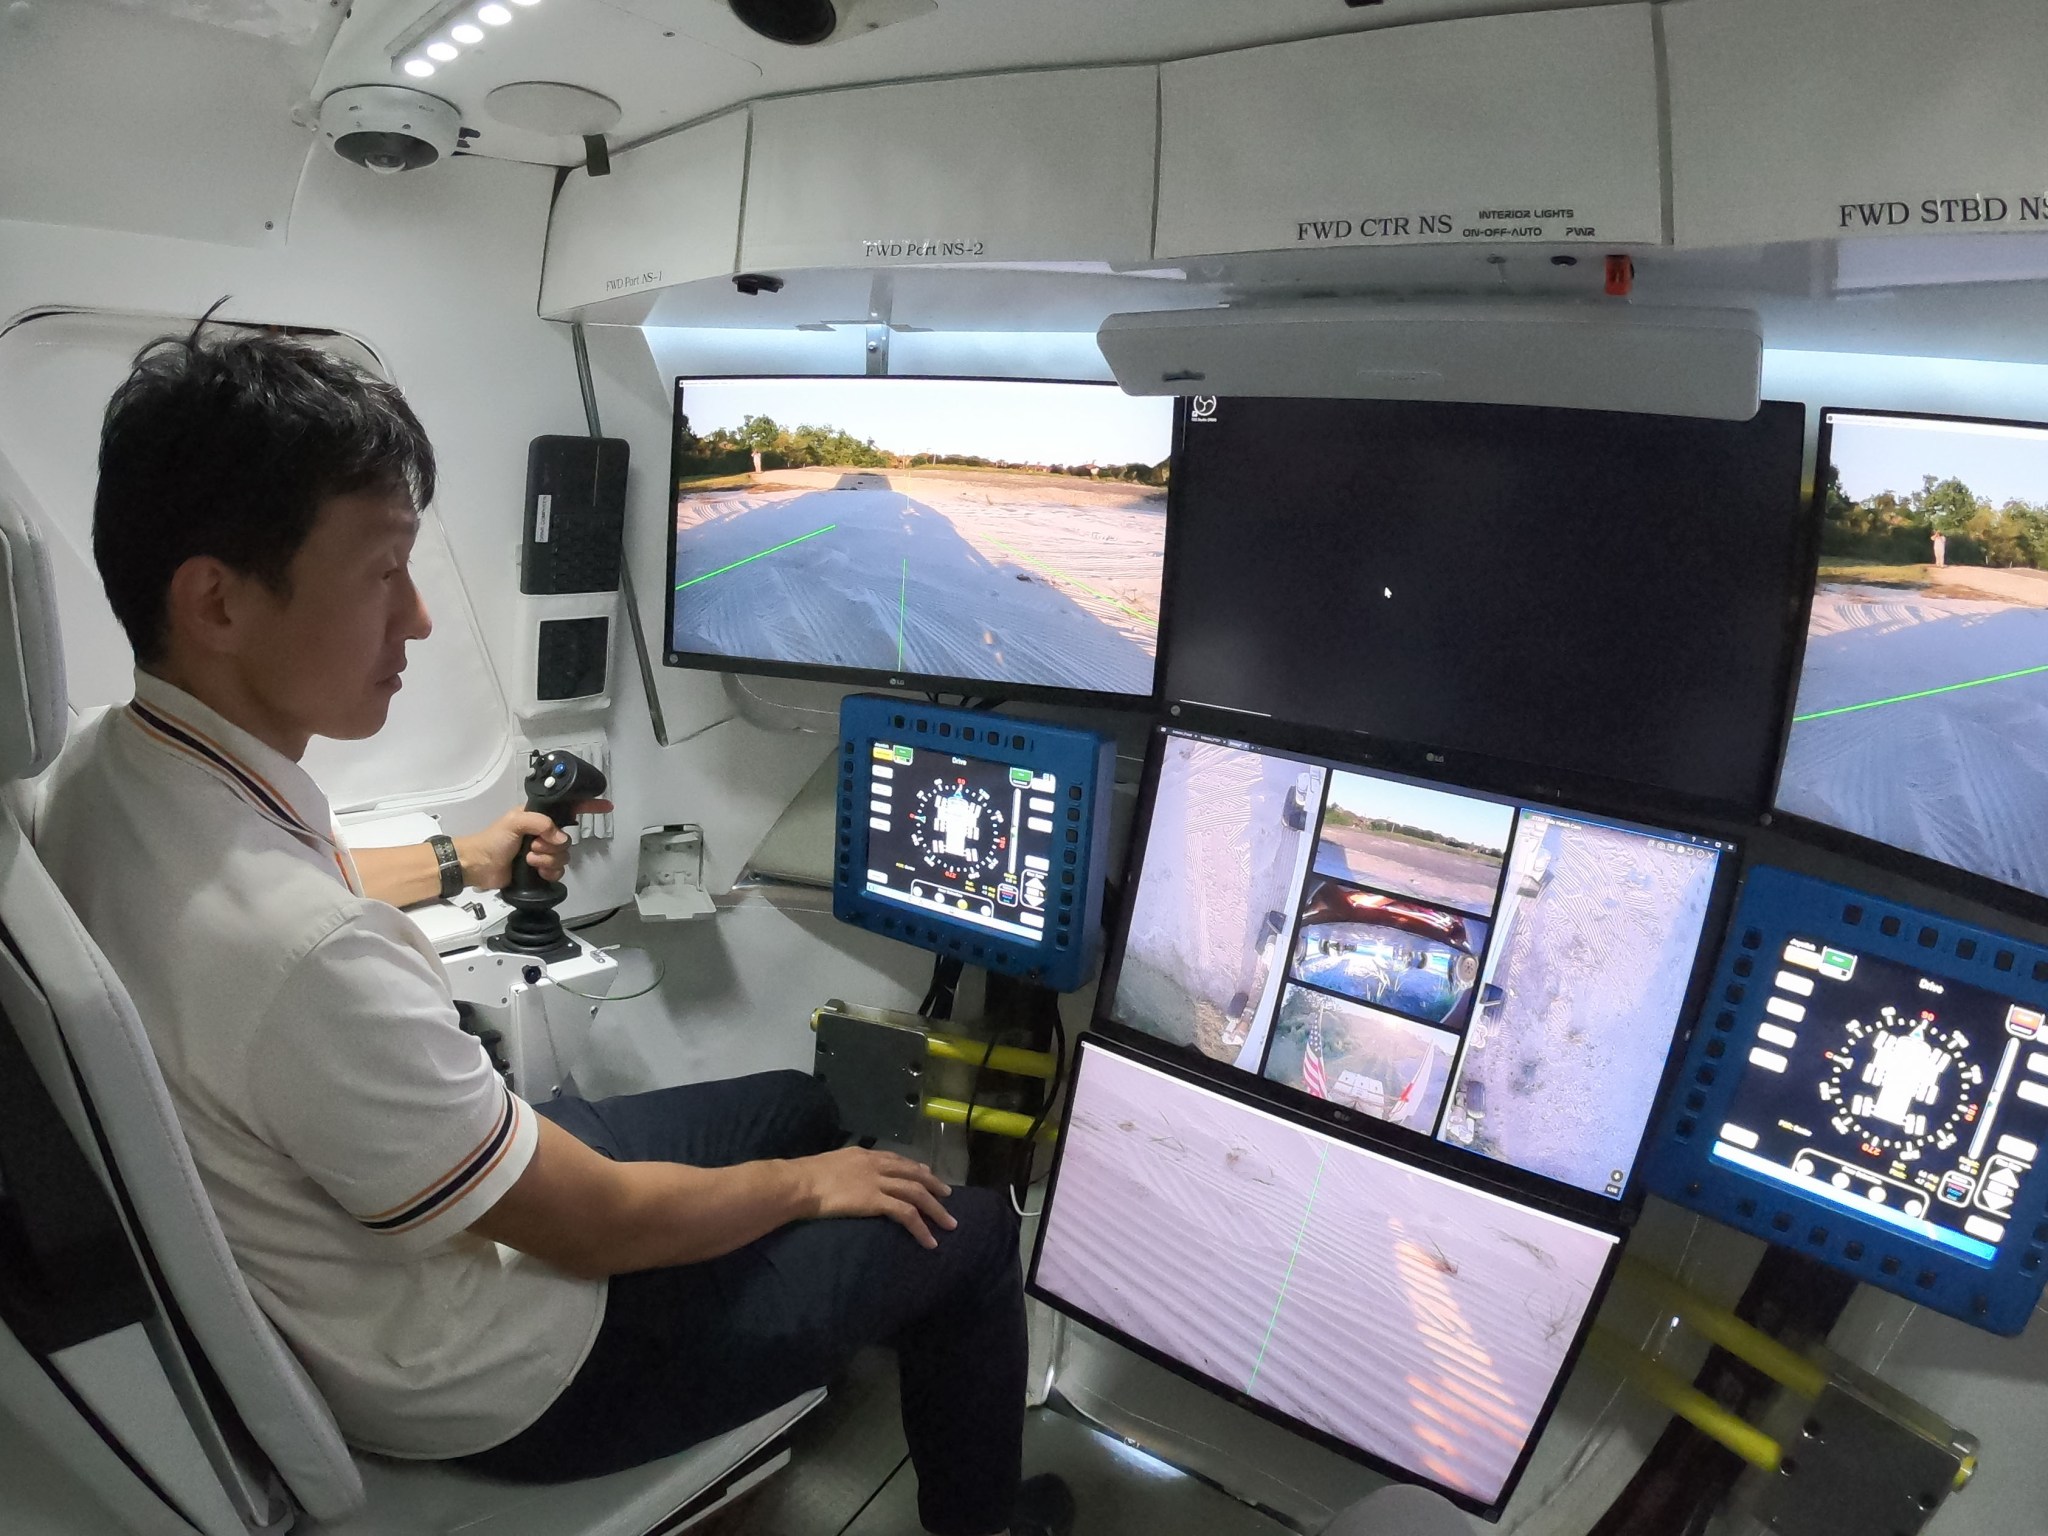 D-RATS crew member Naofumi Ikeda practices driving the rover at NASA’s Johnson Space Center prior to the analog mission.